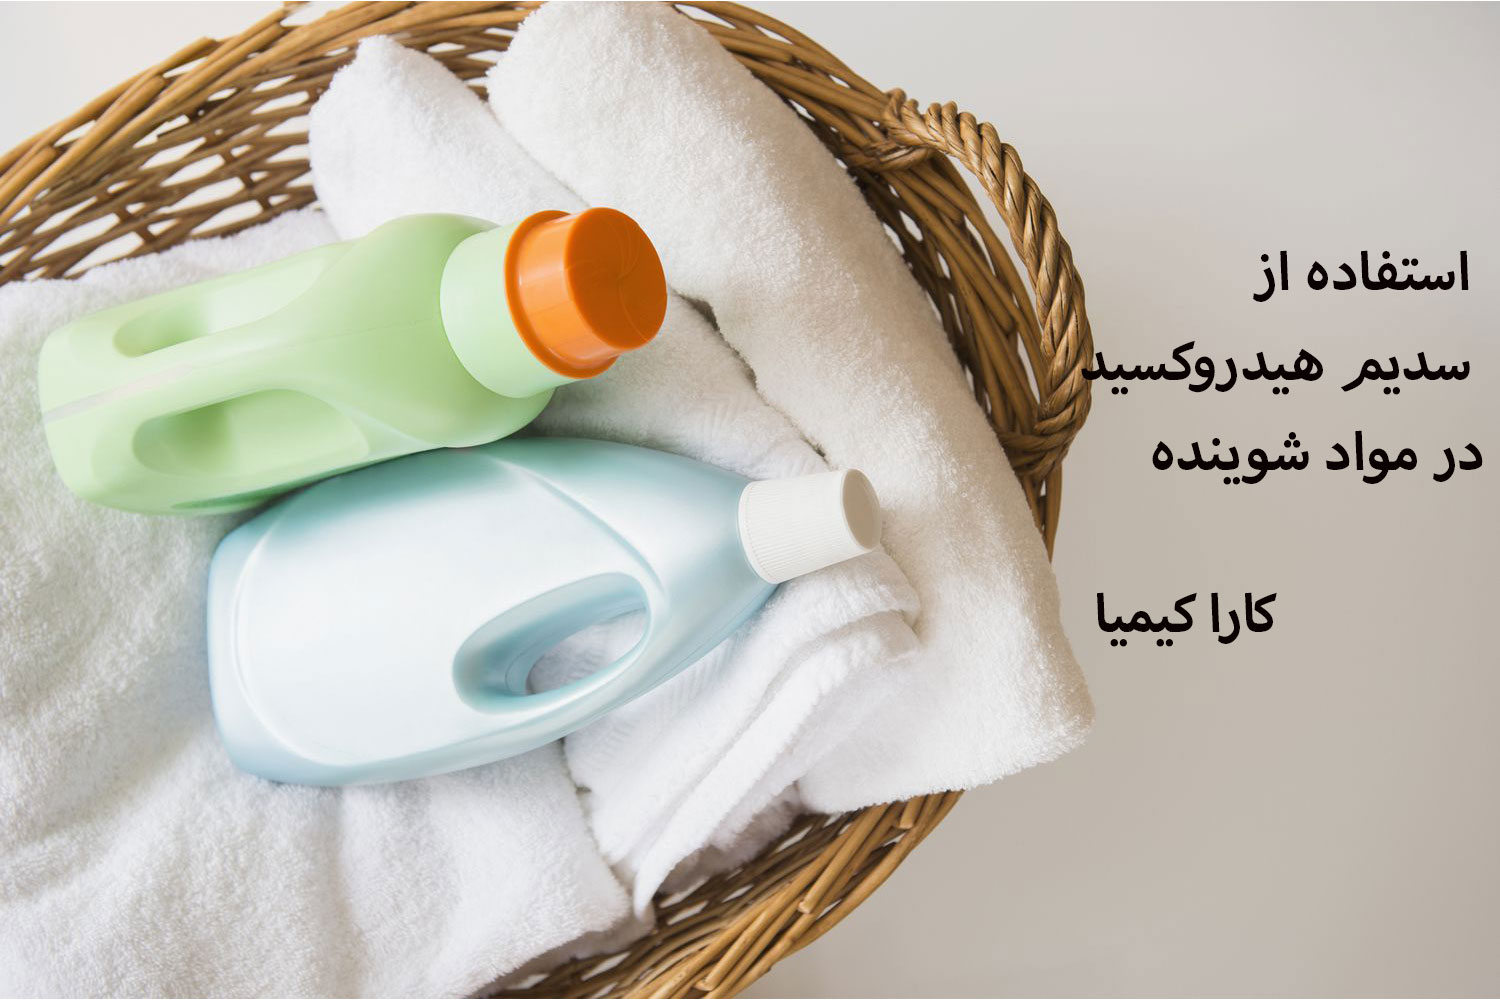 Application in detergents with Sodium Hydroxide